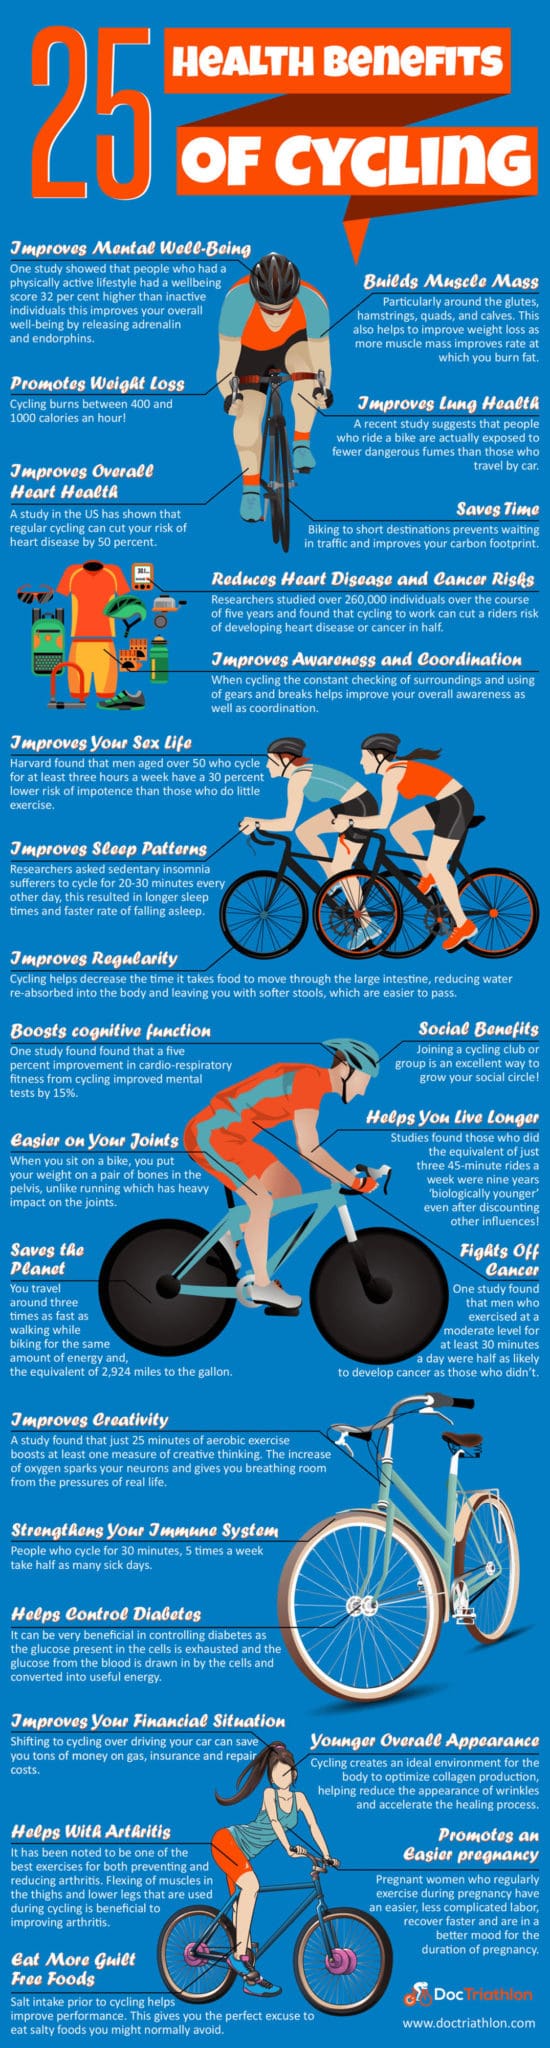 25 Health Benefits of Cycling